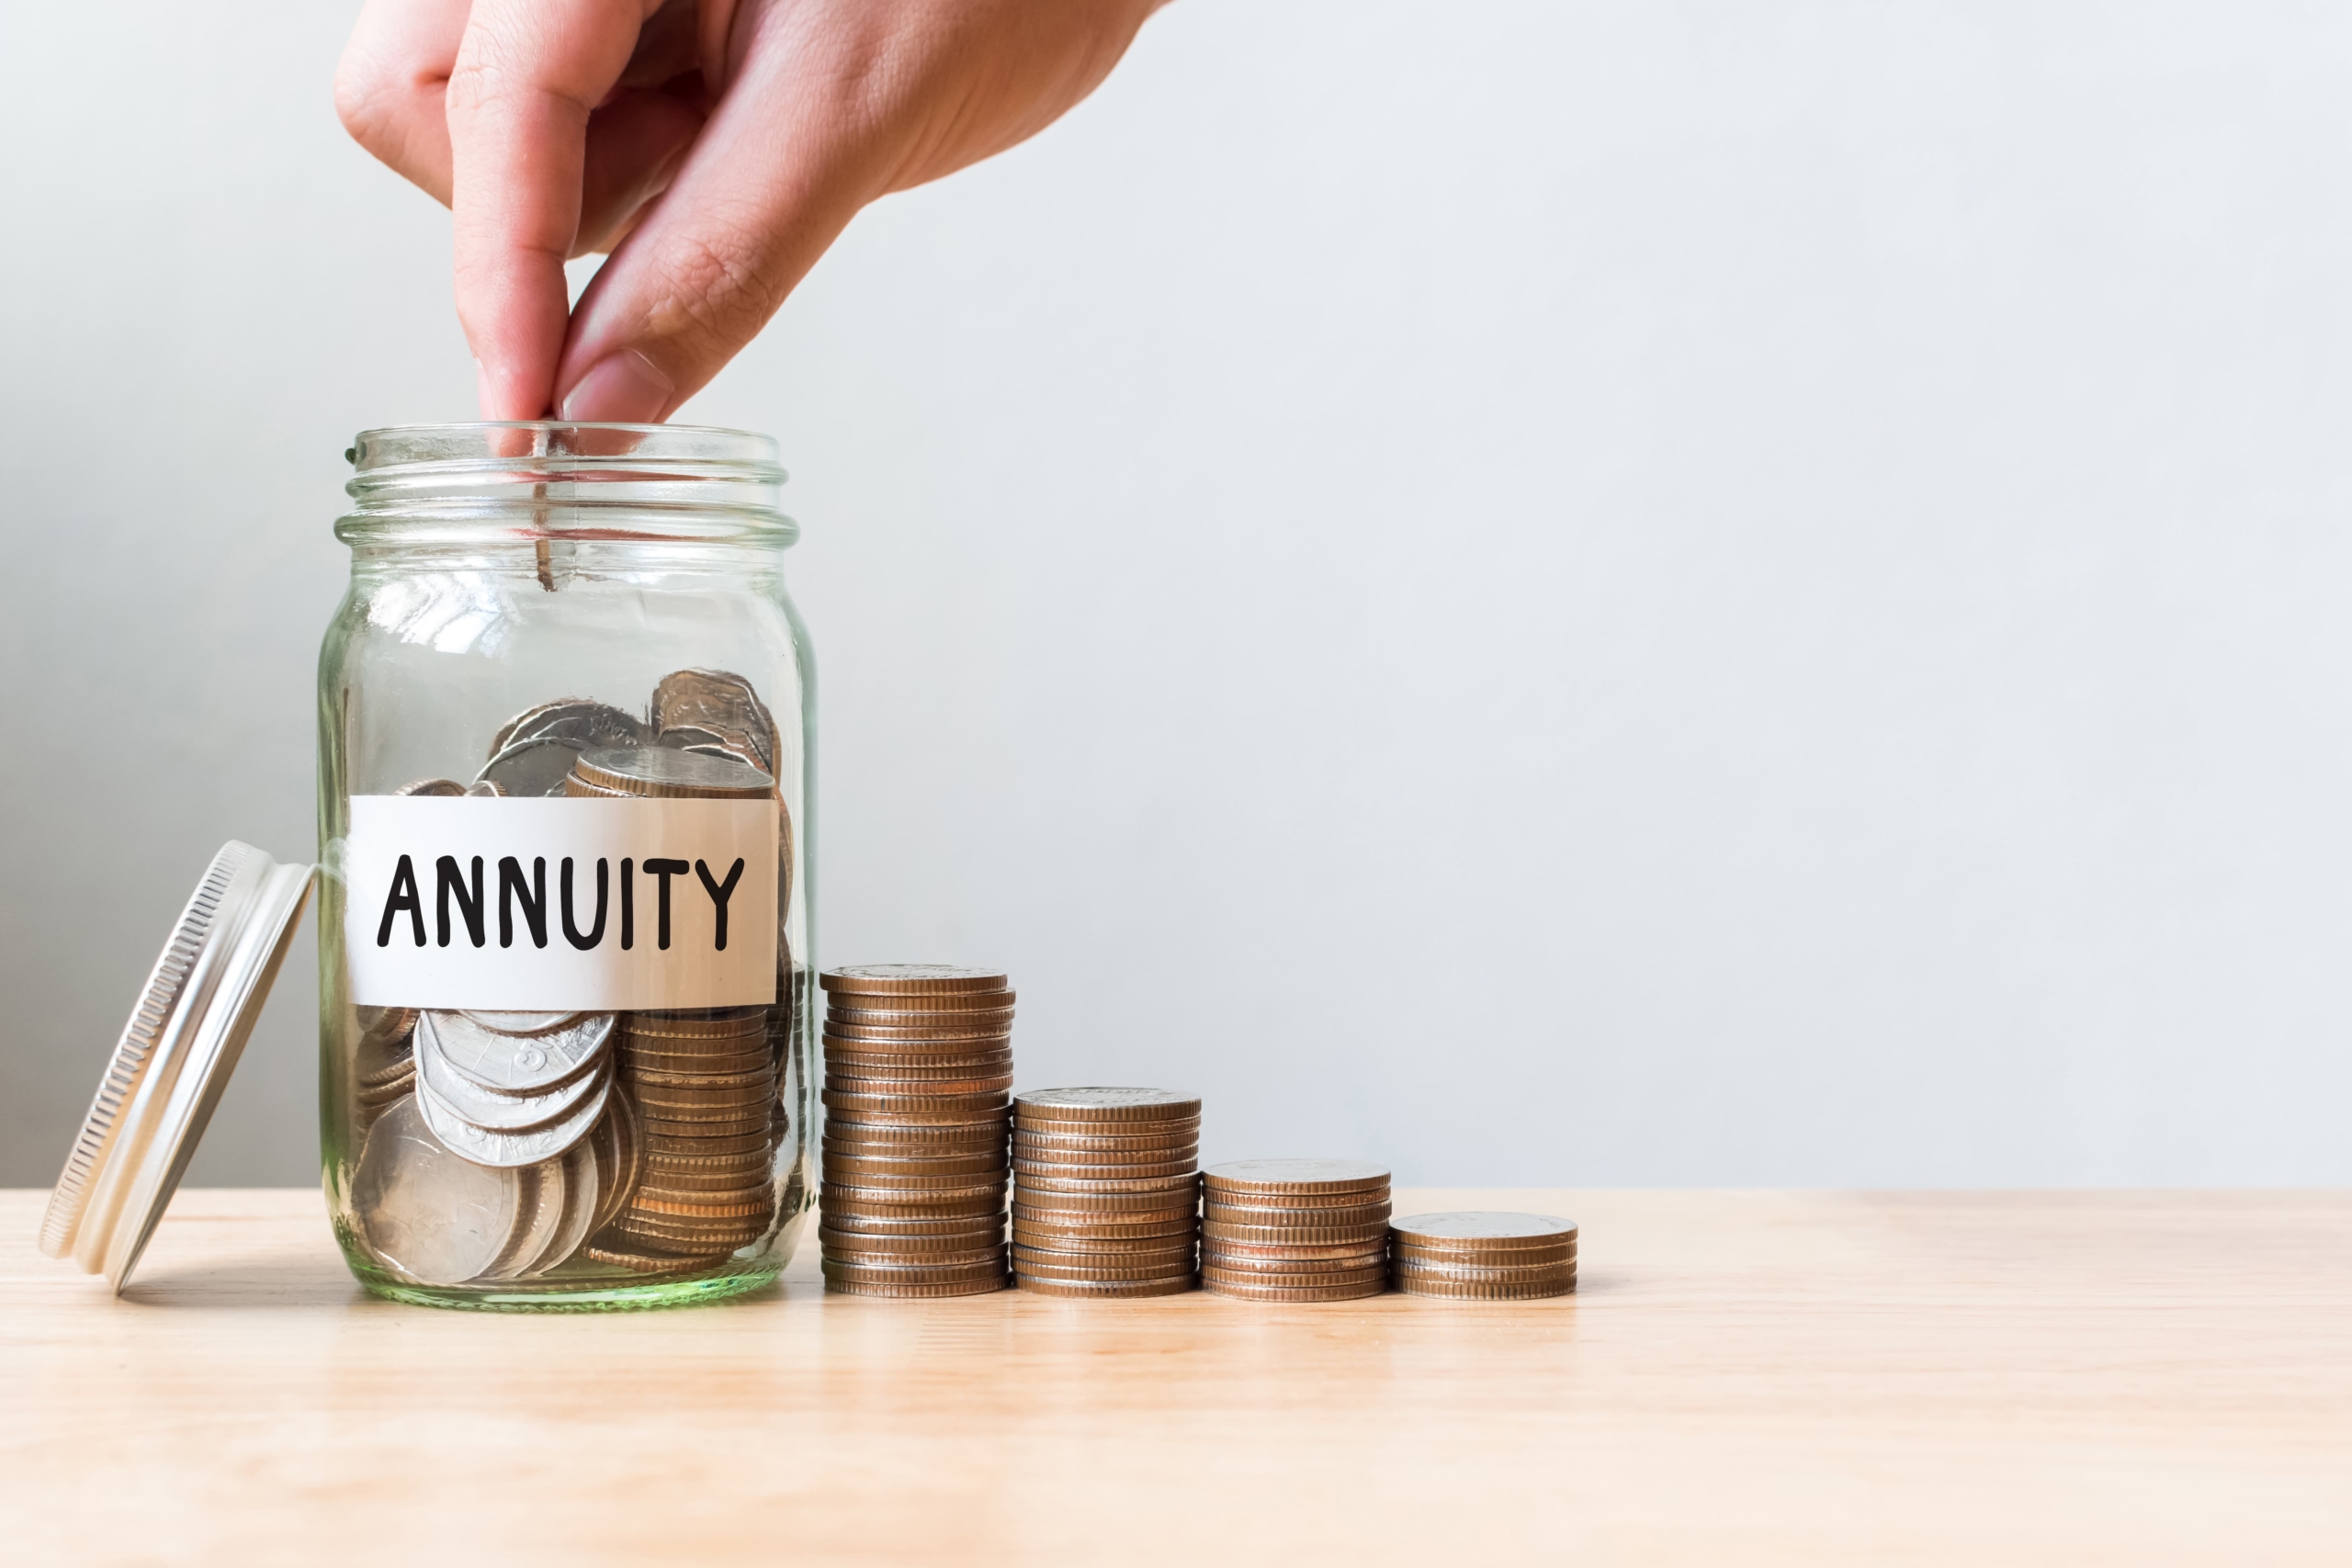 Hand putting coin in jar word annuity with coins stacked